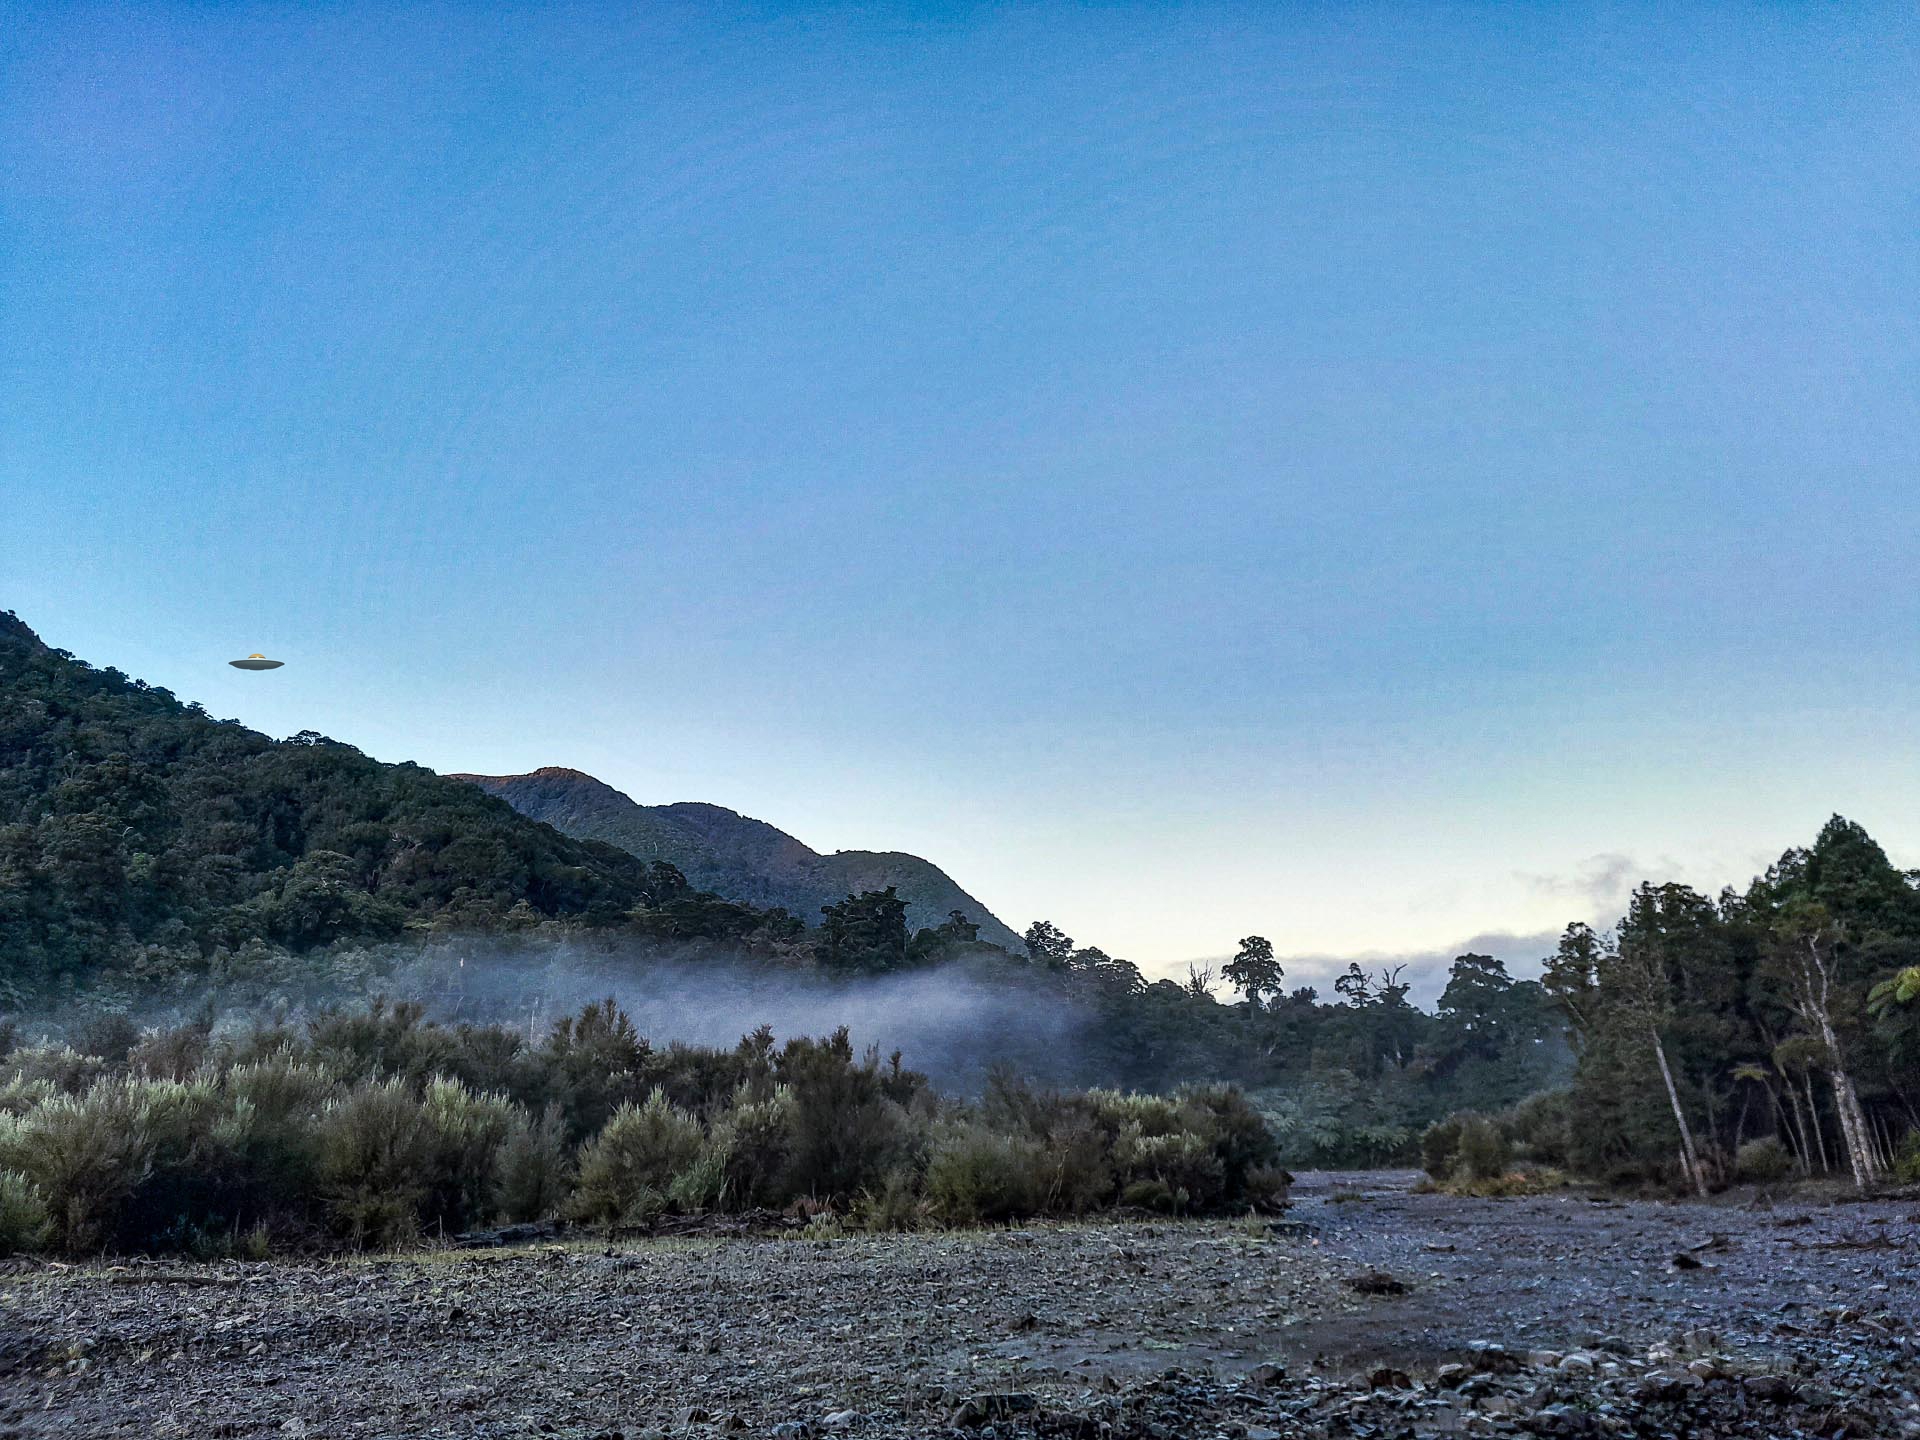 Orongorongo Valley as the early mist clears